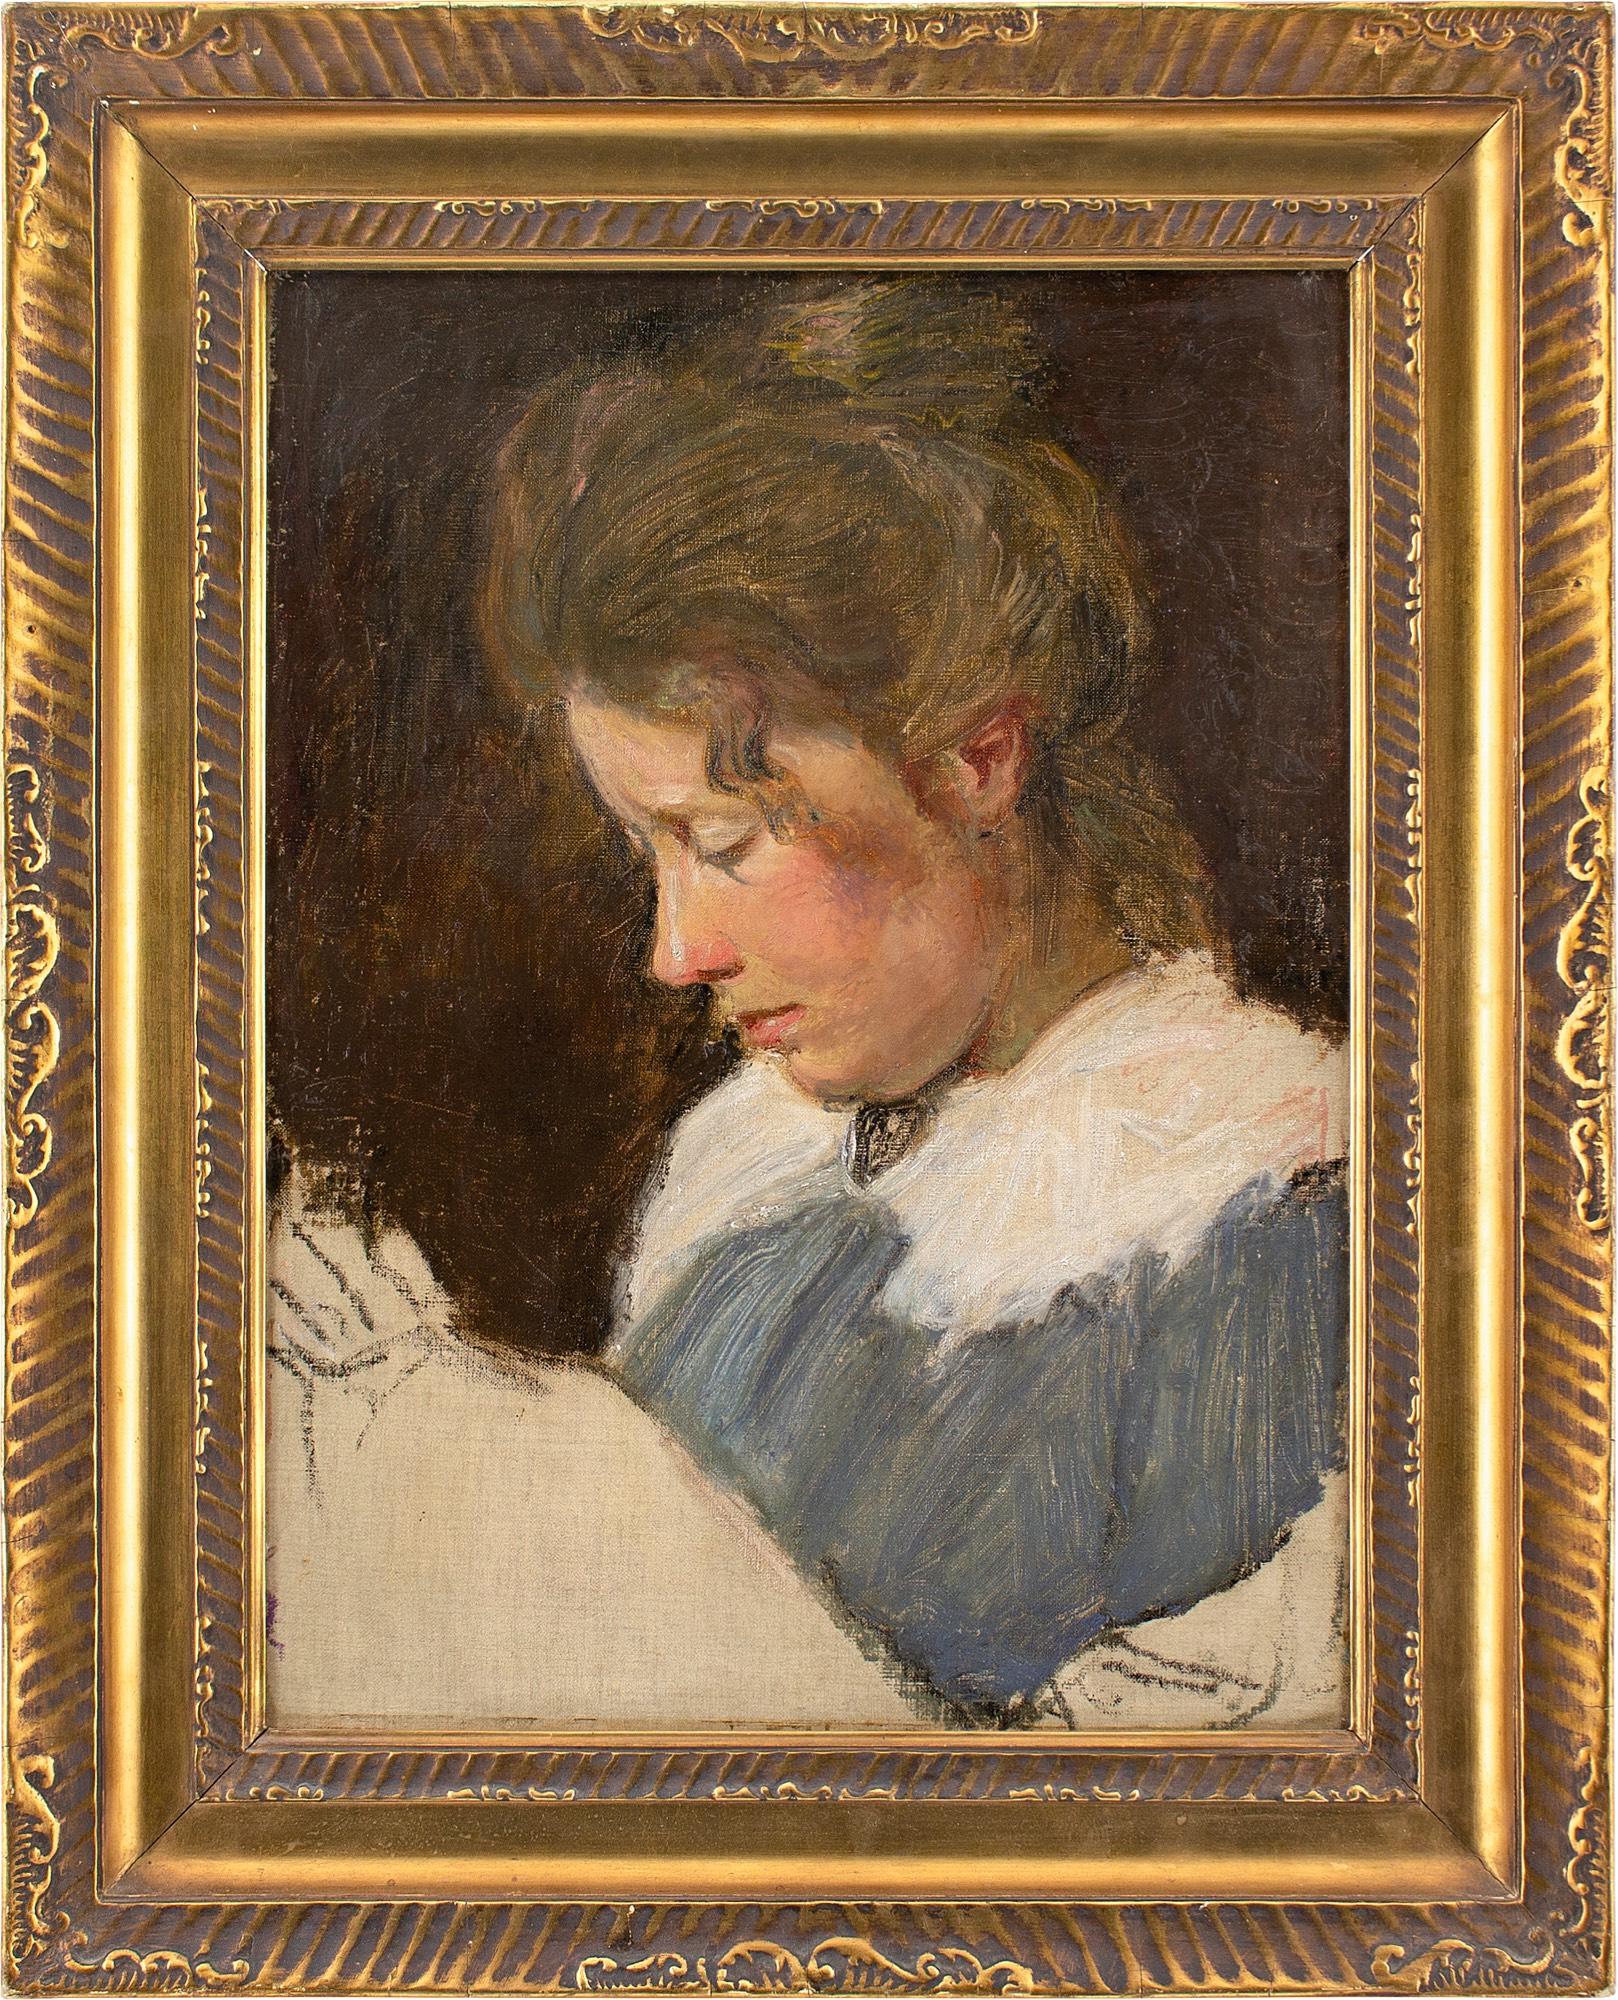 Unknown Portrait Painting - Early 20th-Century Danish School, Study Of A Woman Sewing